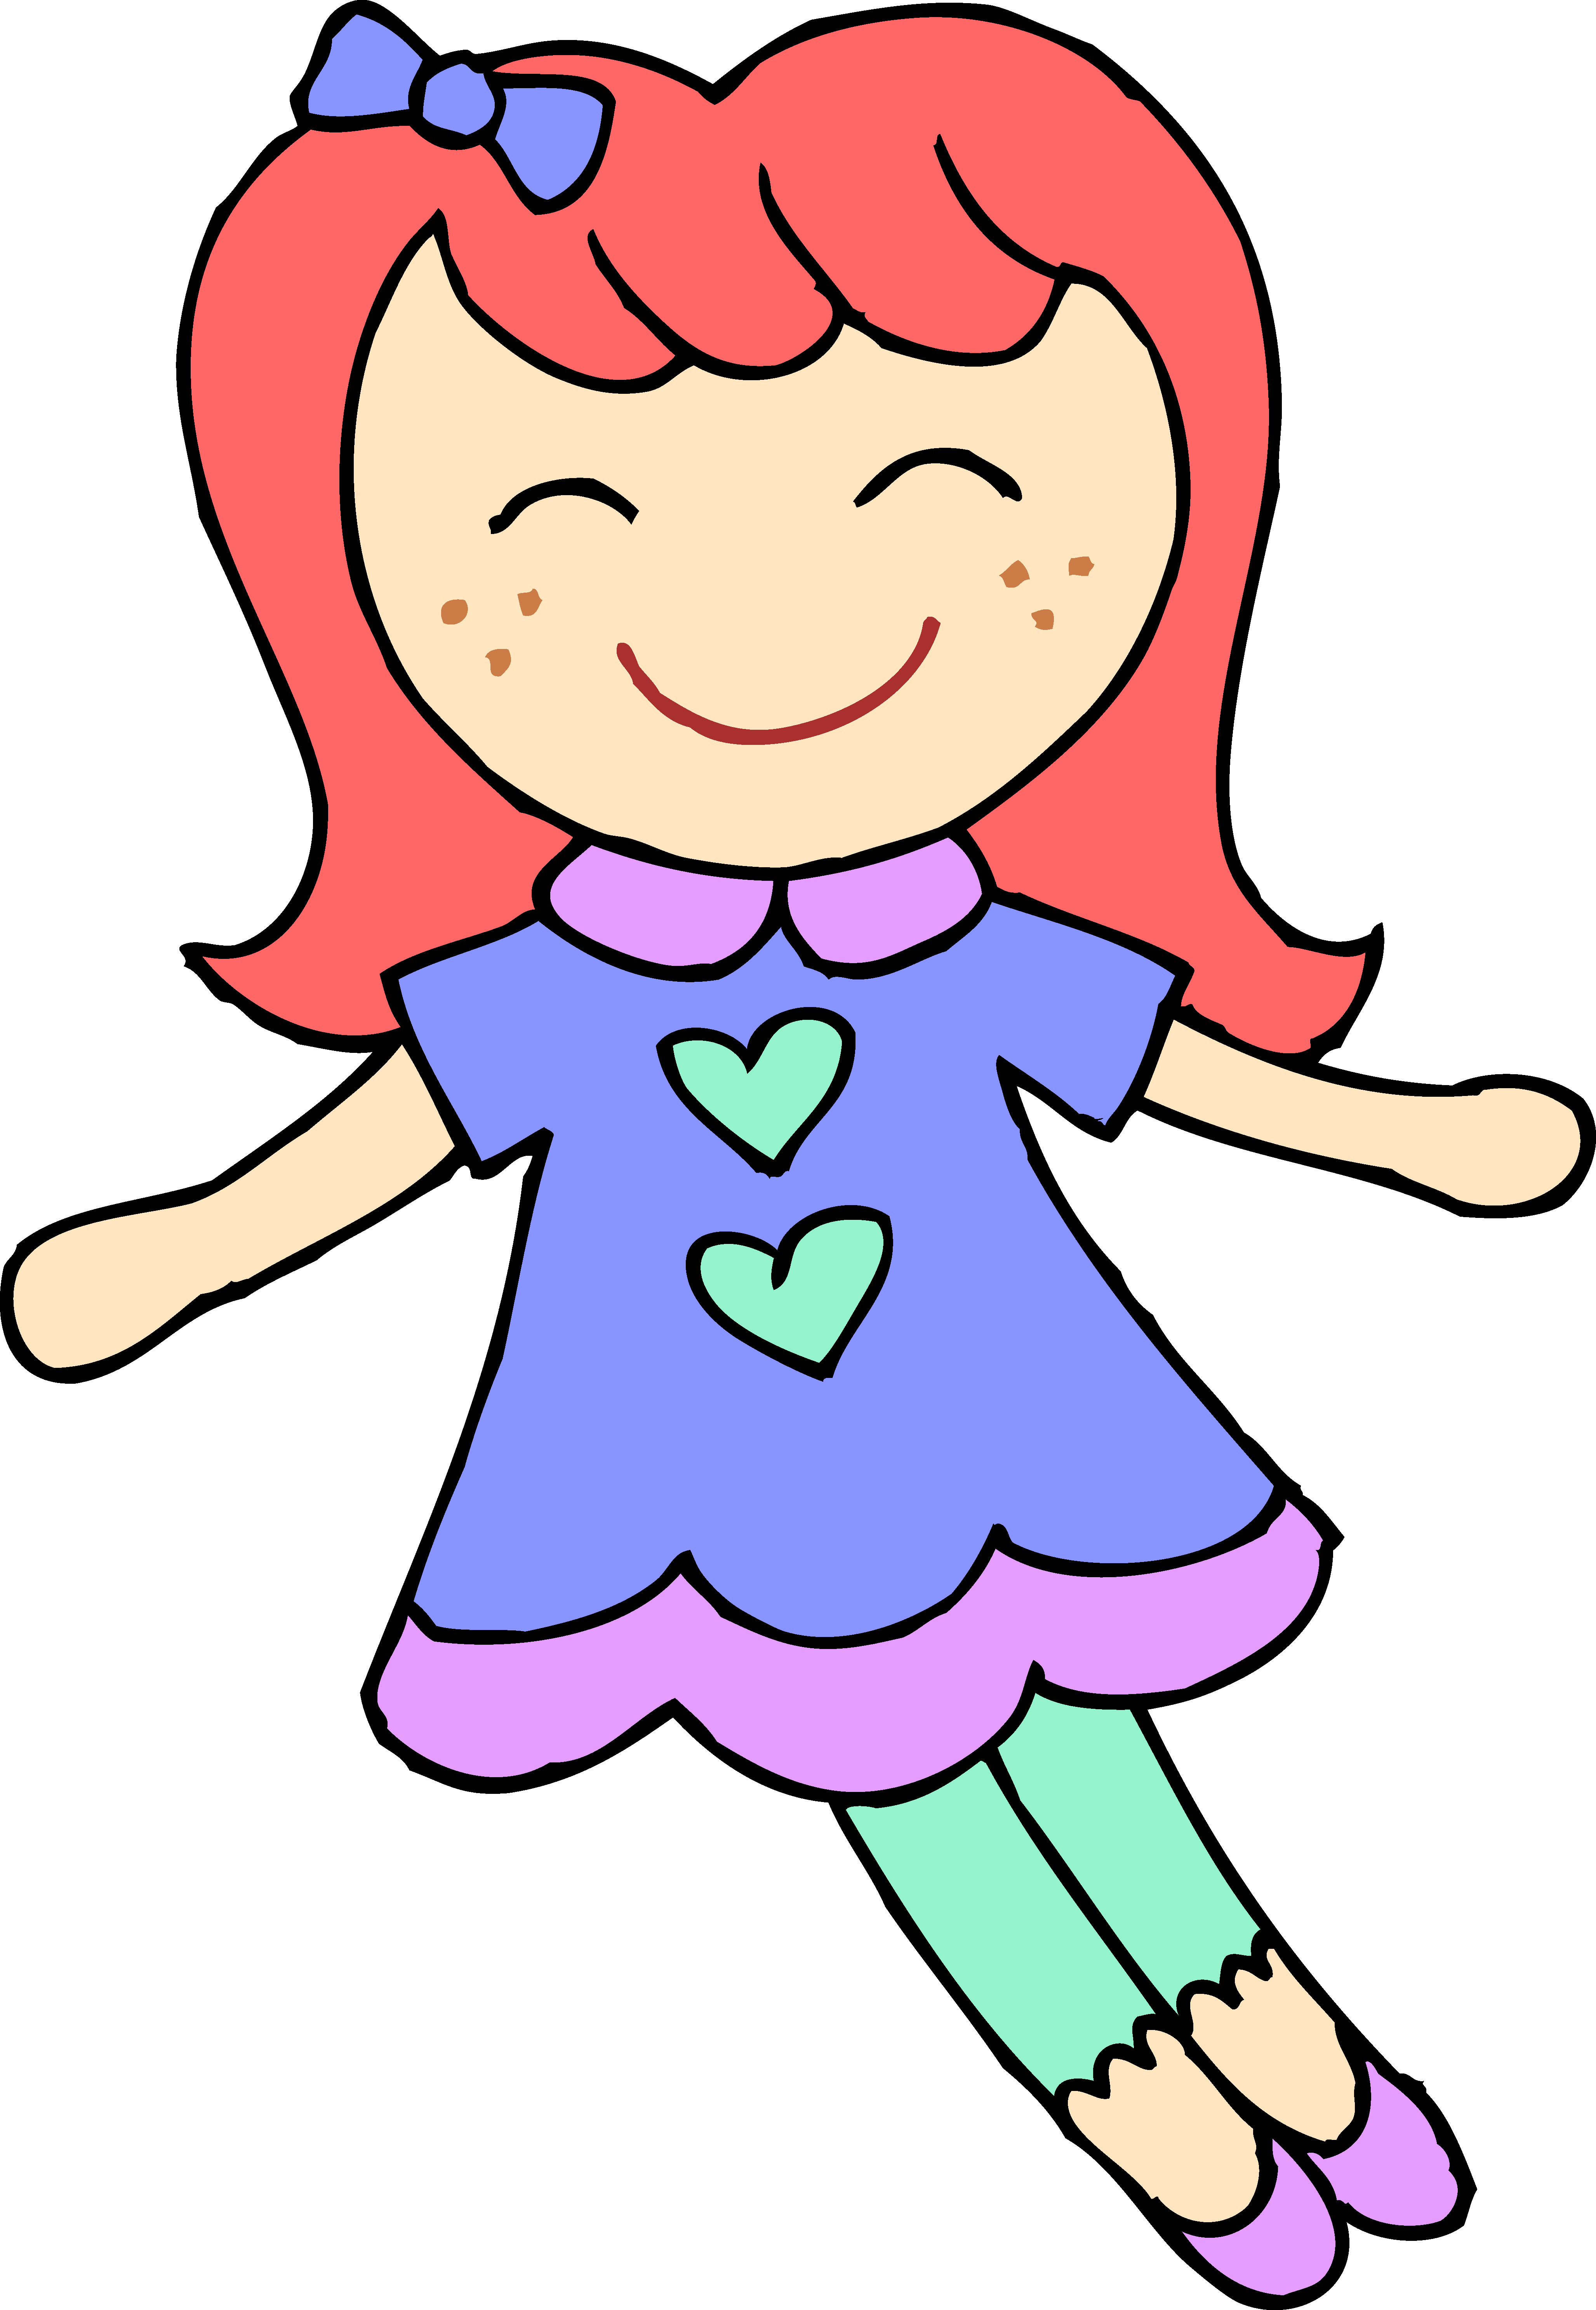 Baby Doll Clipart